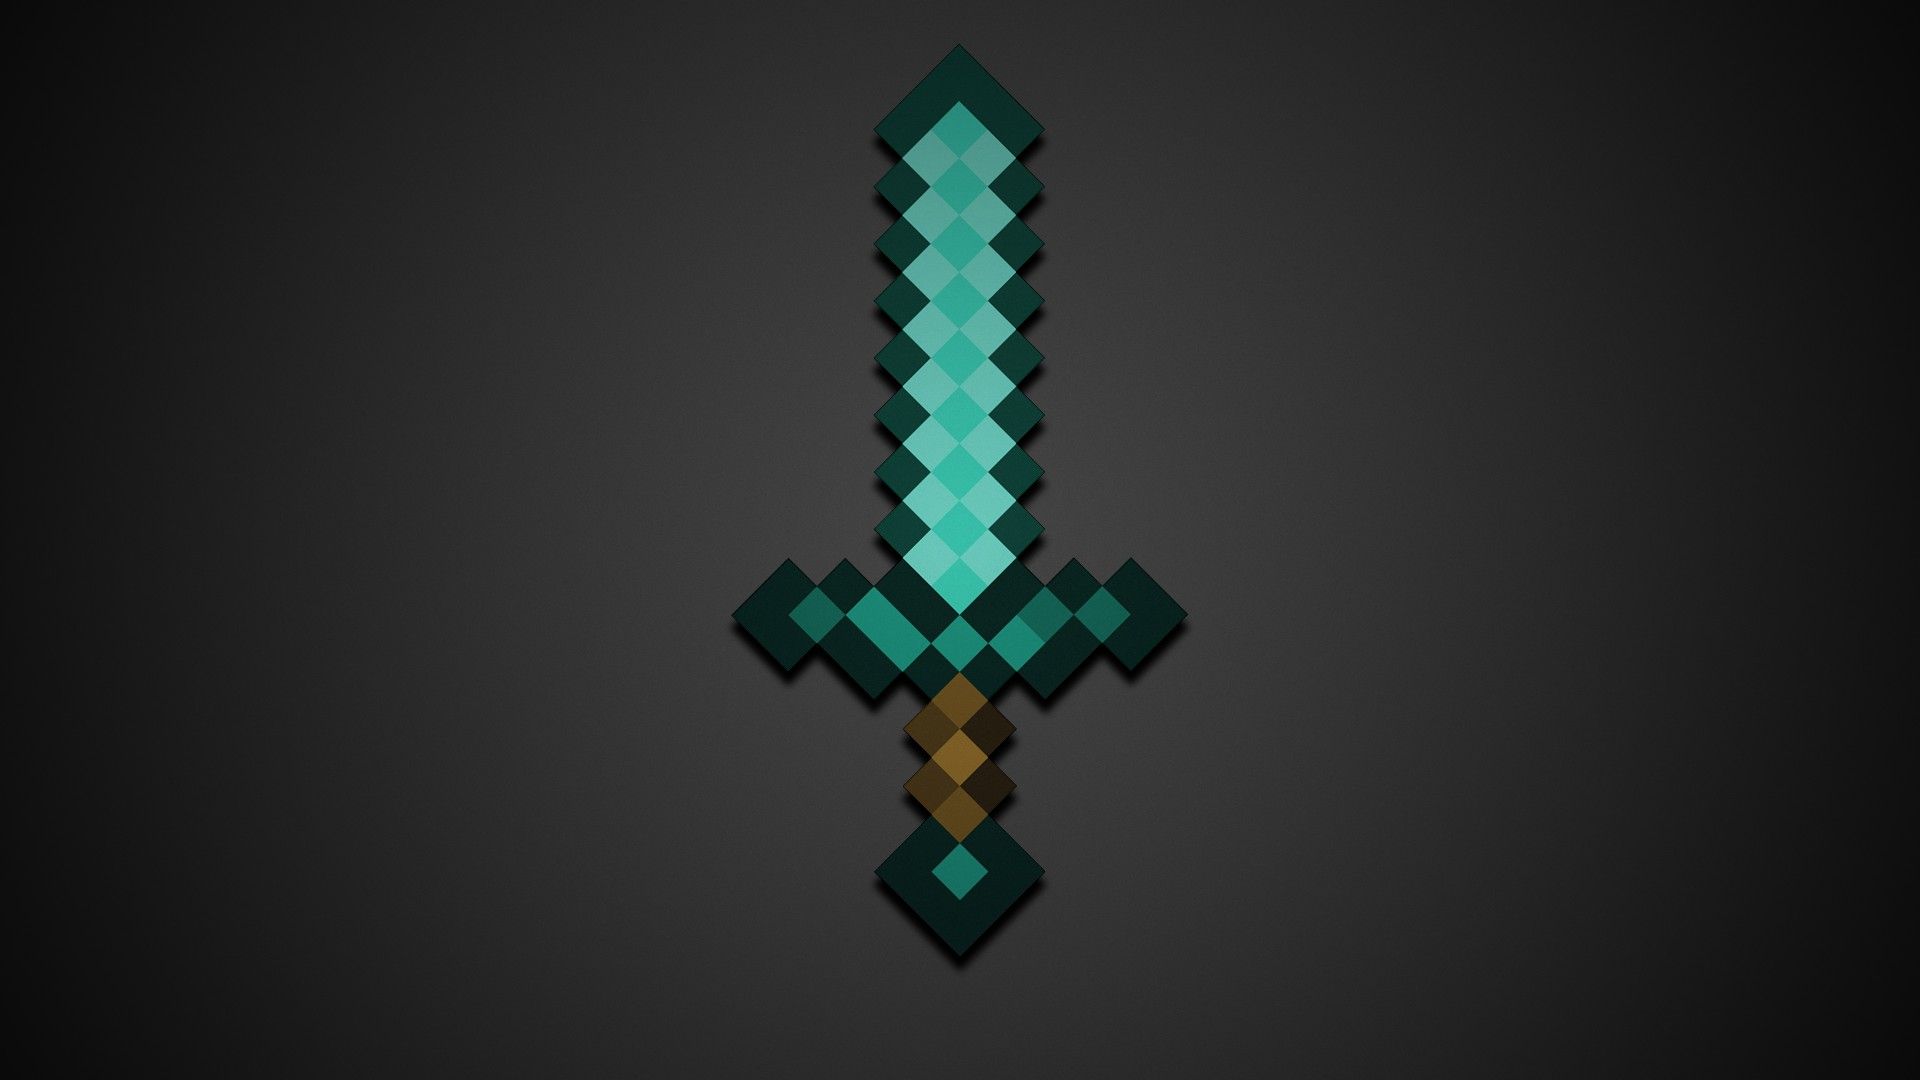 Minecraft Live Wallpaper For Android
minecraft Wallpapers - Minecraft Sword Wallper - HD Wallpaper 